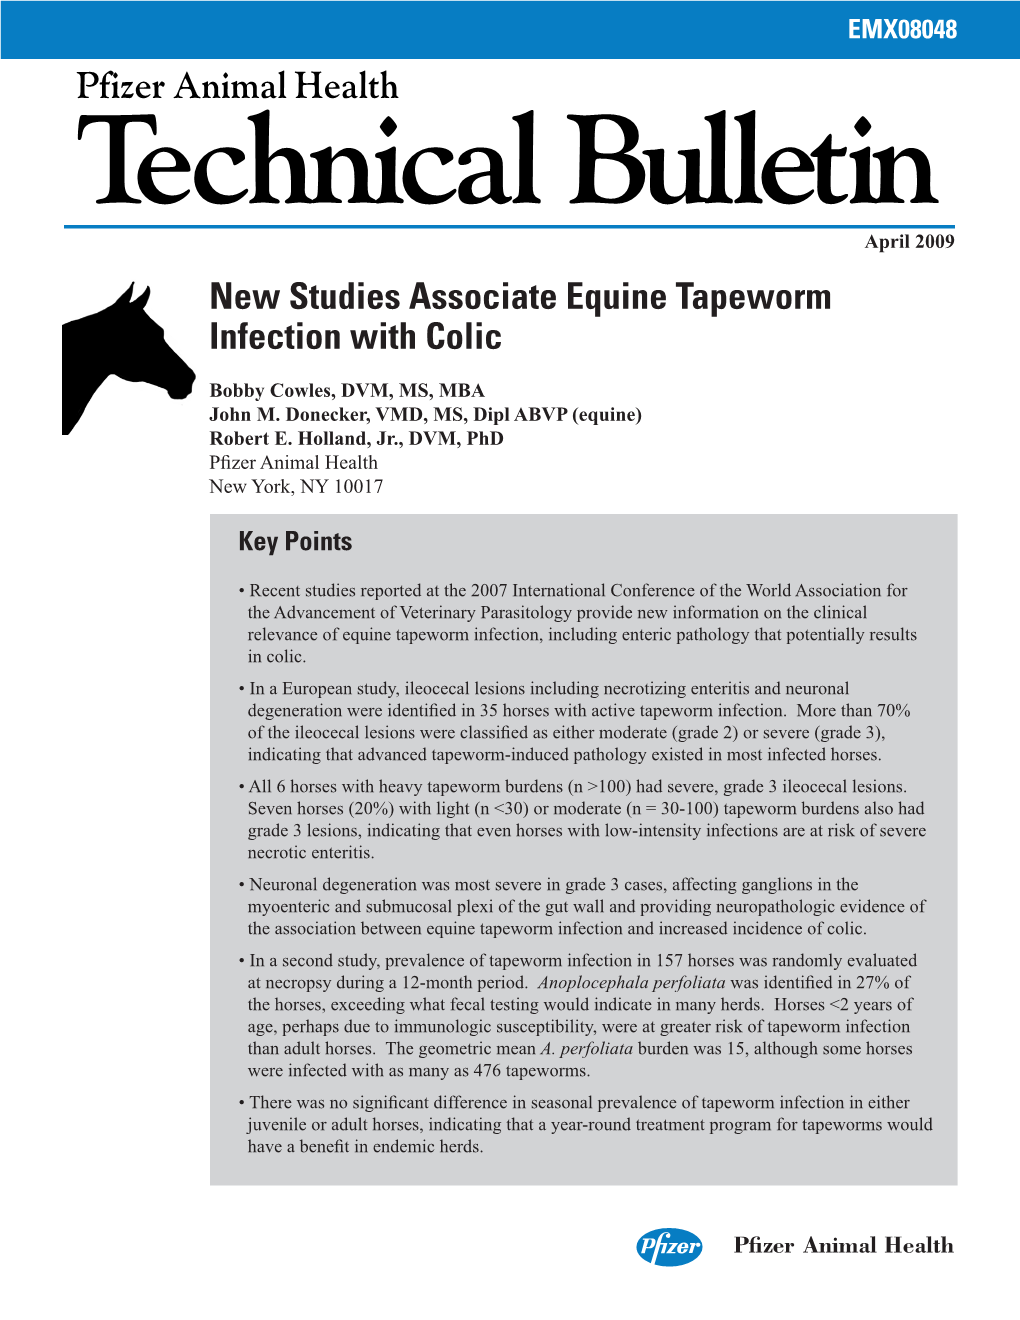 Technical Bulletin Pfizer Animal Health New Studies Associate Equine Tapeworm Infection with Colic